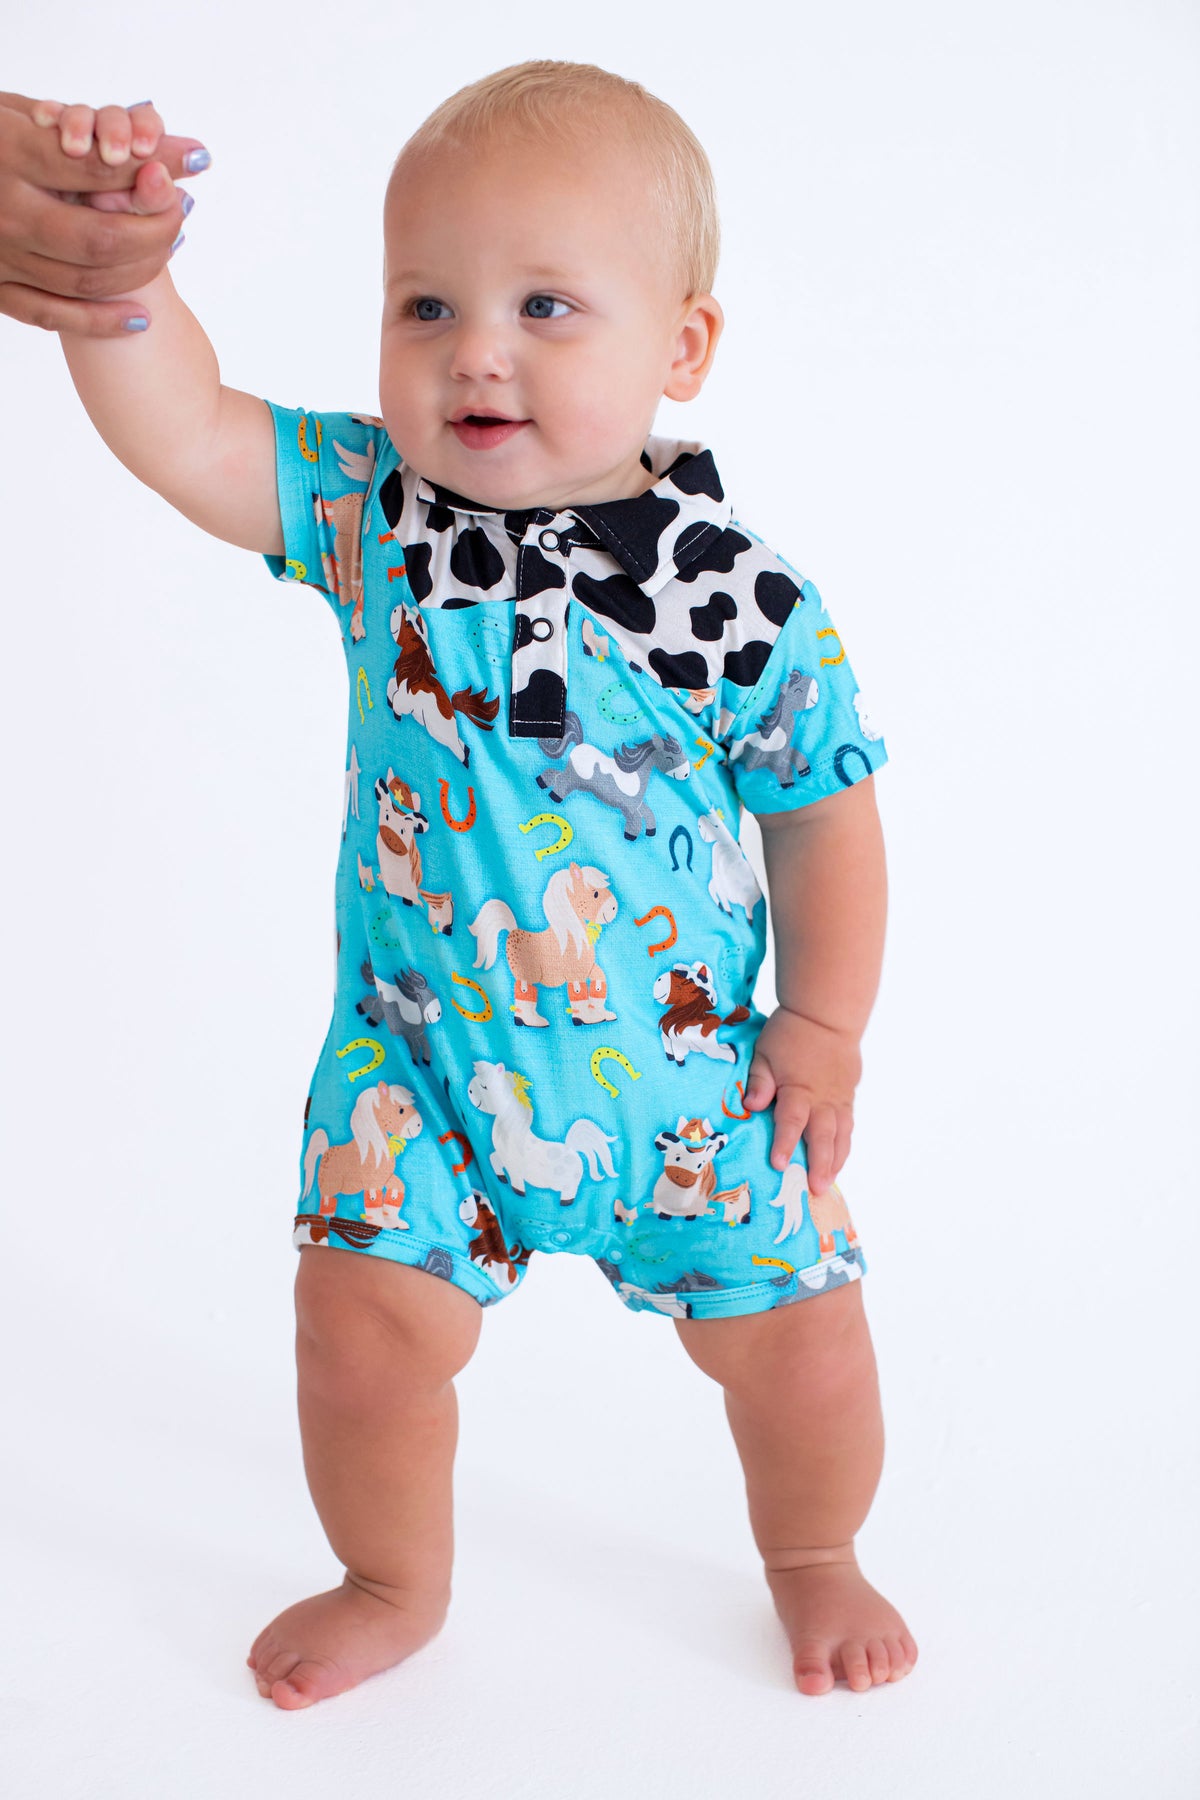 Bunnies By The Bay Blossom's Organic Romper for Newborn and Baby Girls